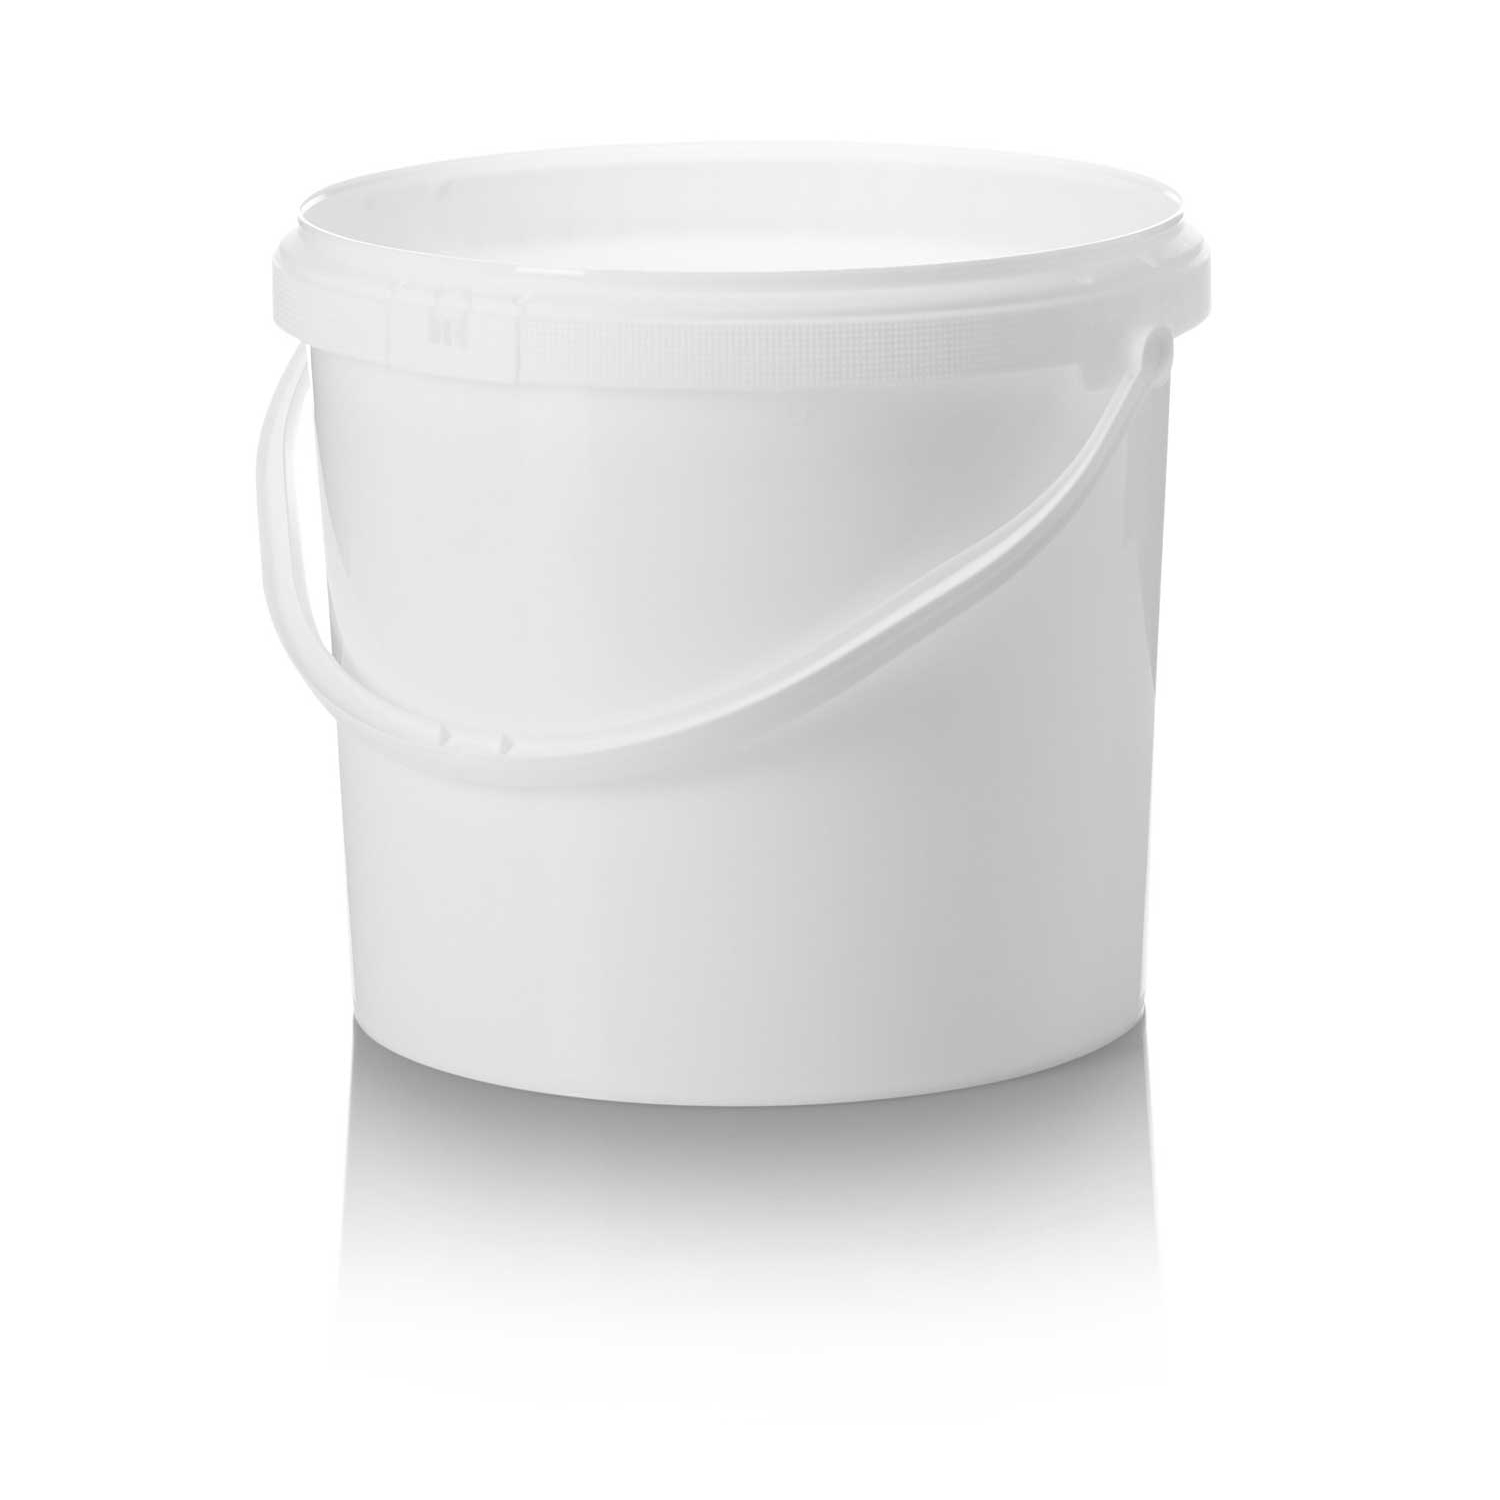 12.5ltr White PP Tamper Evident Pail with Plastic Handle